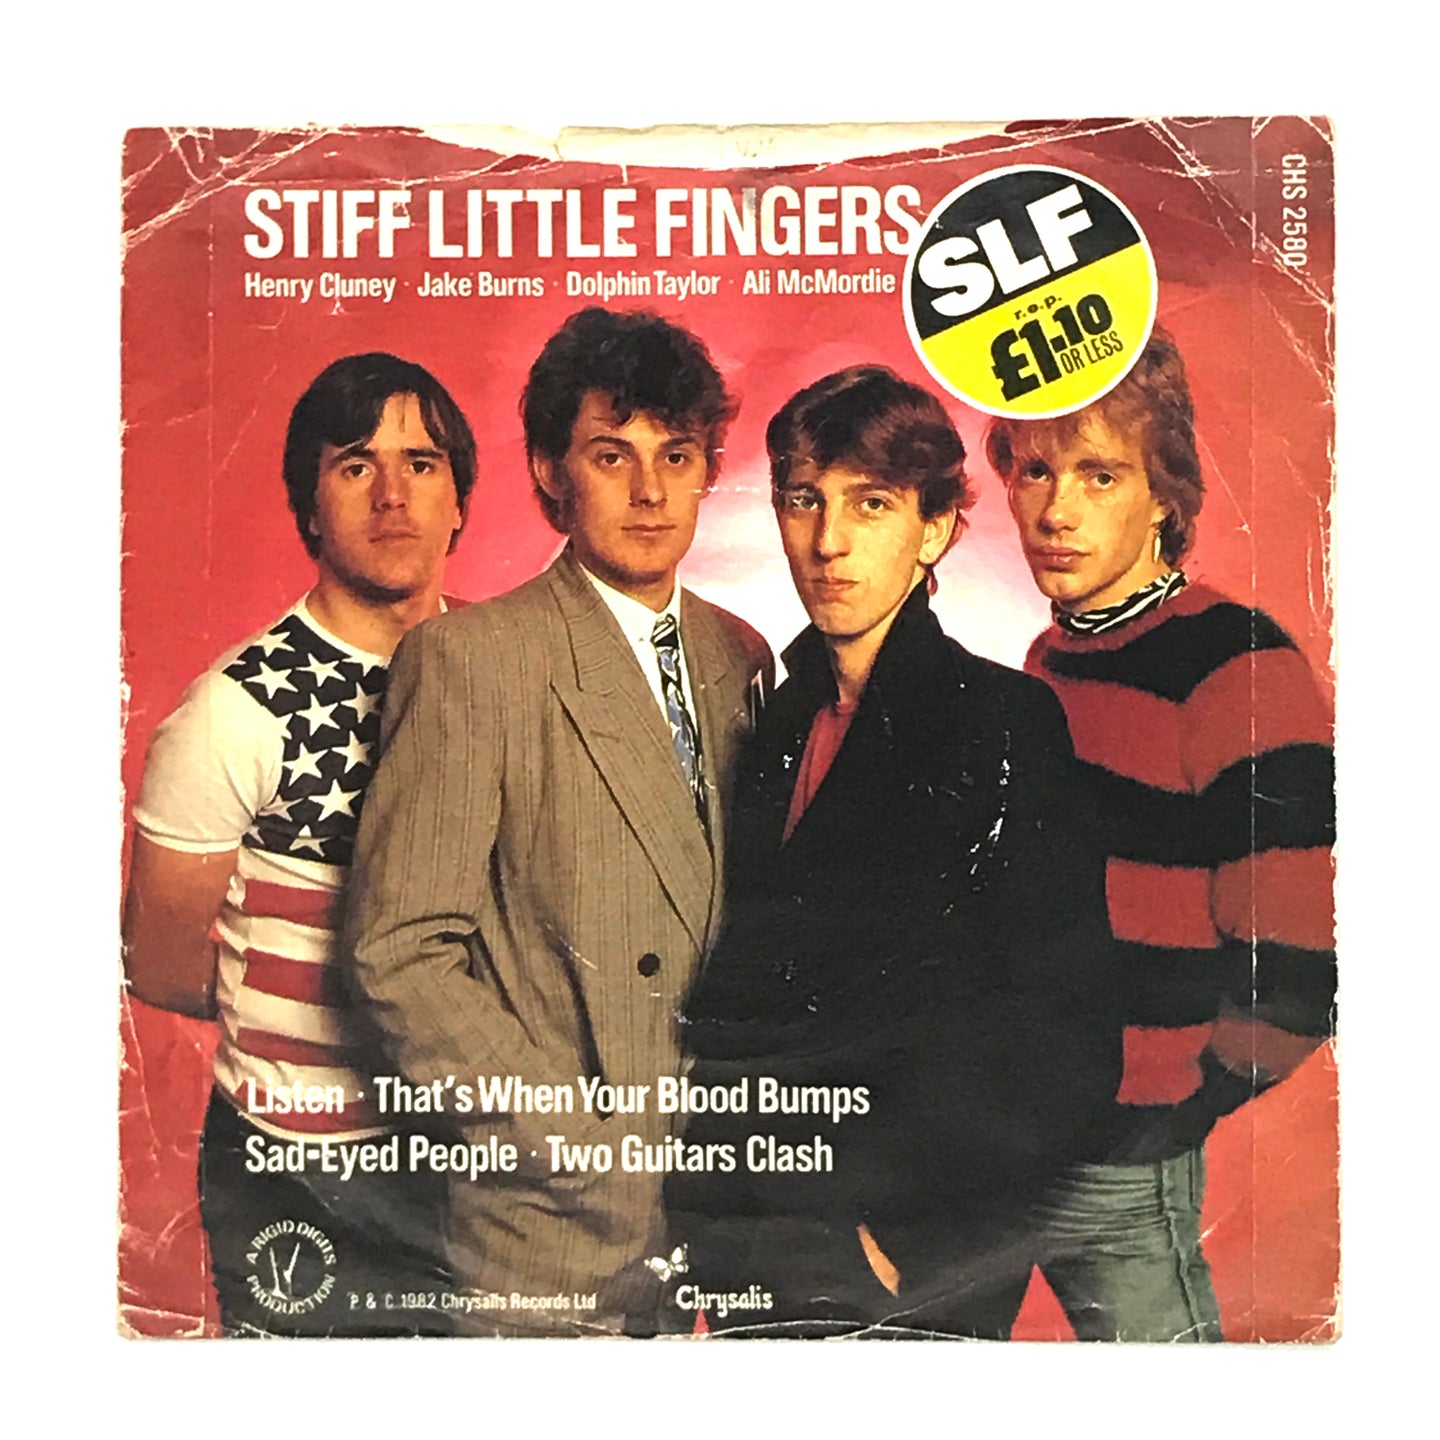 Stiff Little Fingers : LISTEN/ THAT'S WHEN YOUR BLOOD BUMPS/ SAD-EYED PEOPLE/ TWO GUITARS CLASH